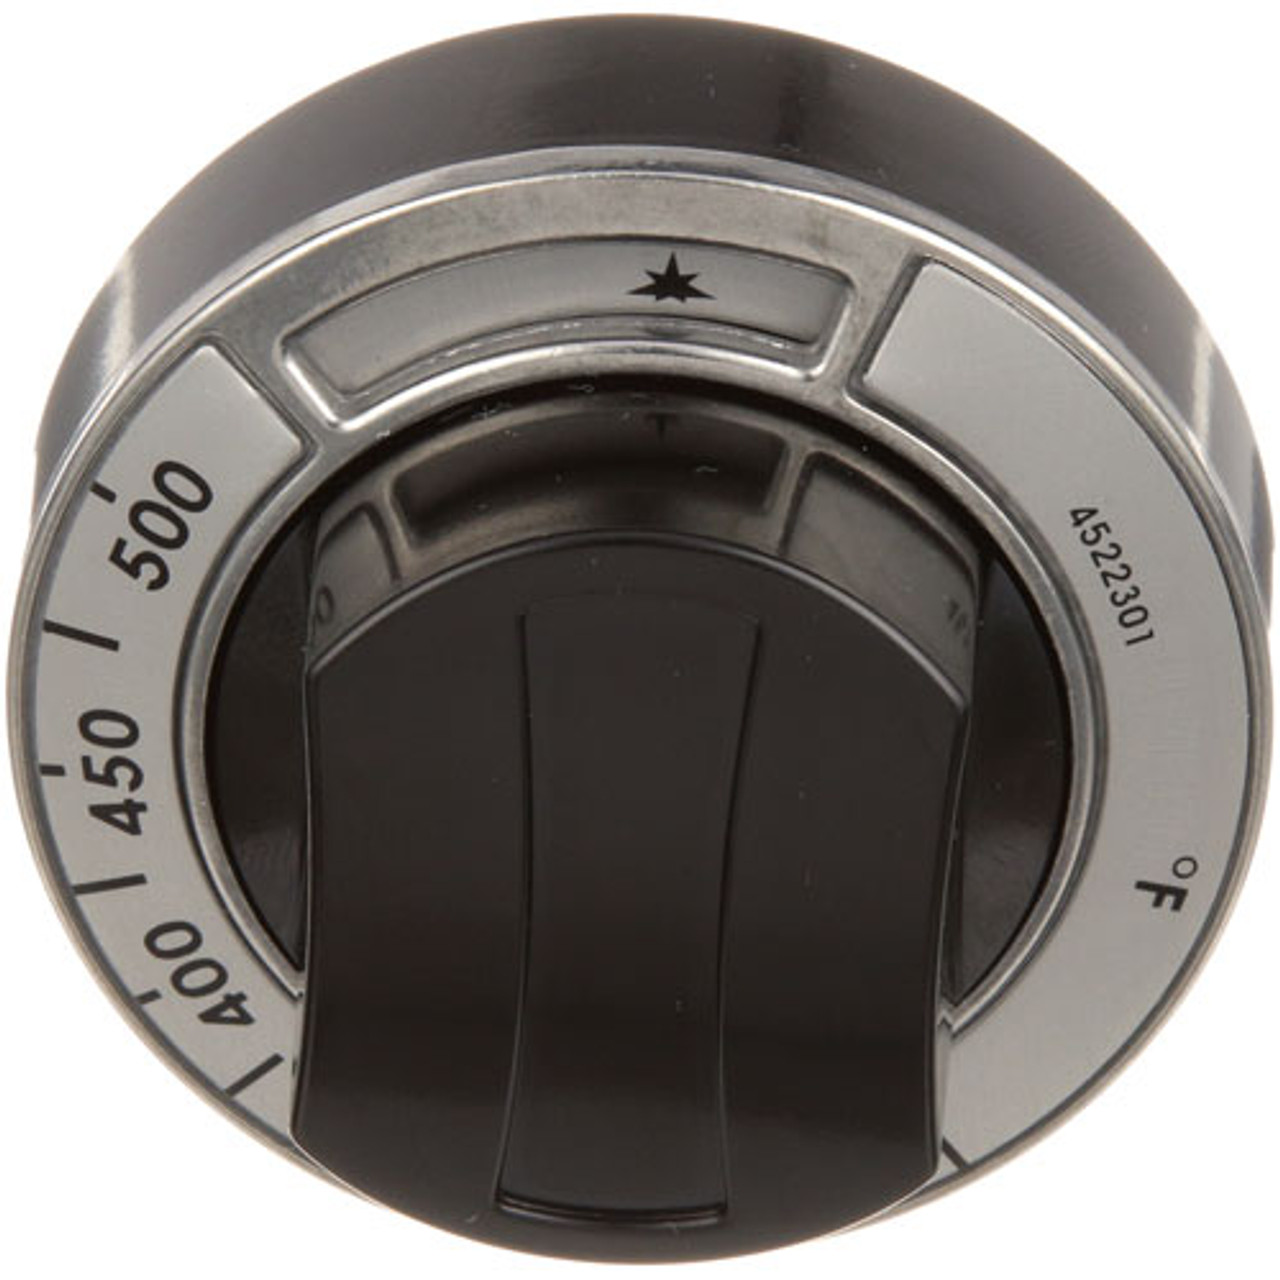 Knob Assembly - Replacement Part For Garland 4525442